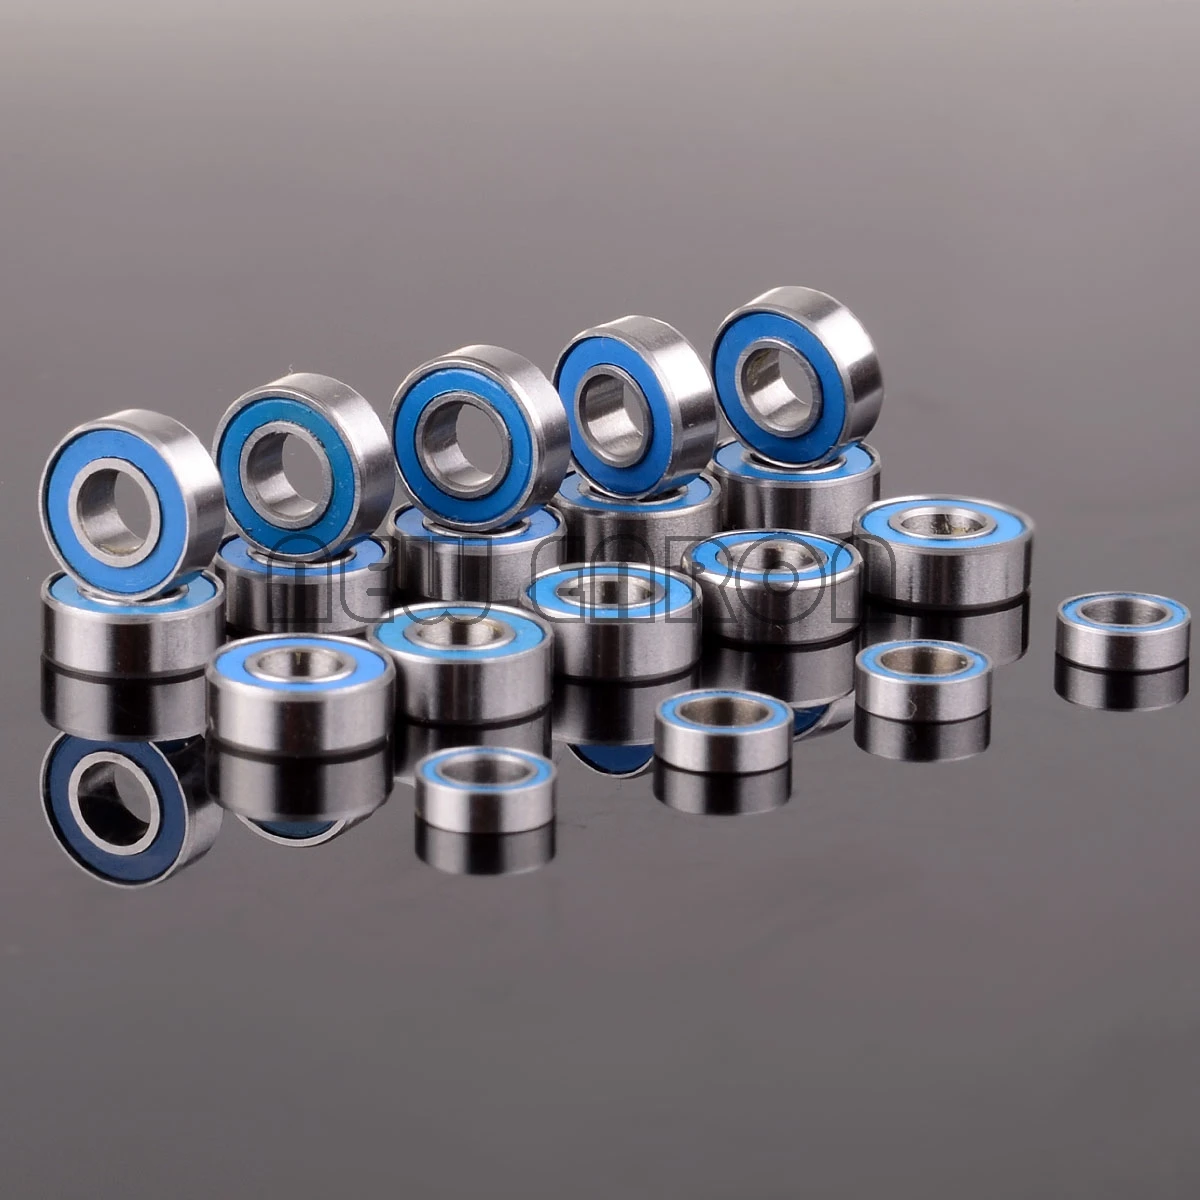 

NEW ENRON Chrome Steel Ball Bearing Metric Blue Rubber Sealed on Two Sides 19PCS Stampede Bandit Kit FOR RC Traxxas Slash 2WD